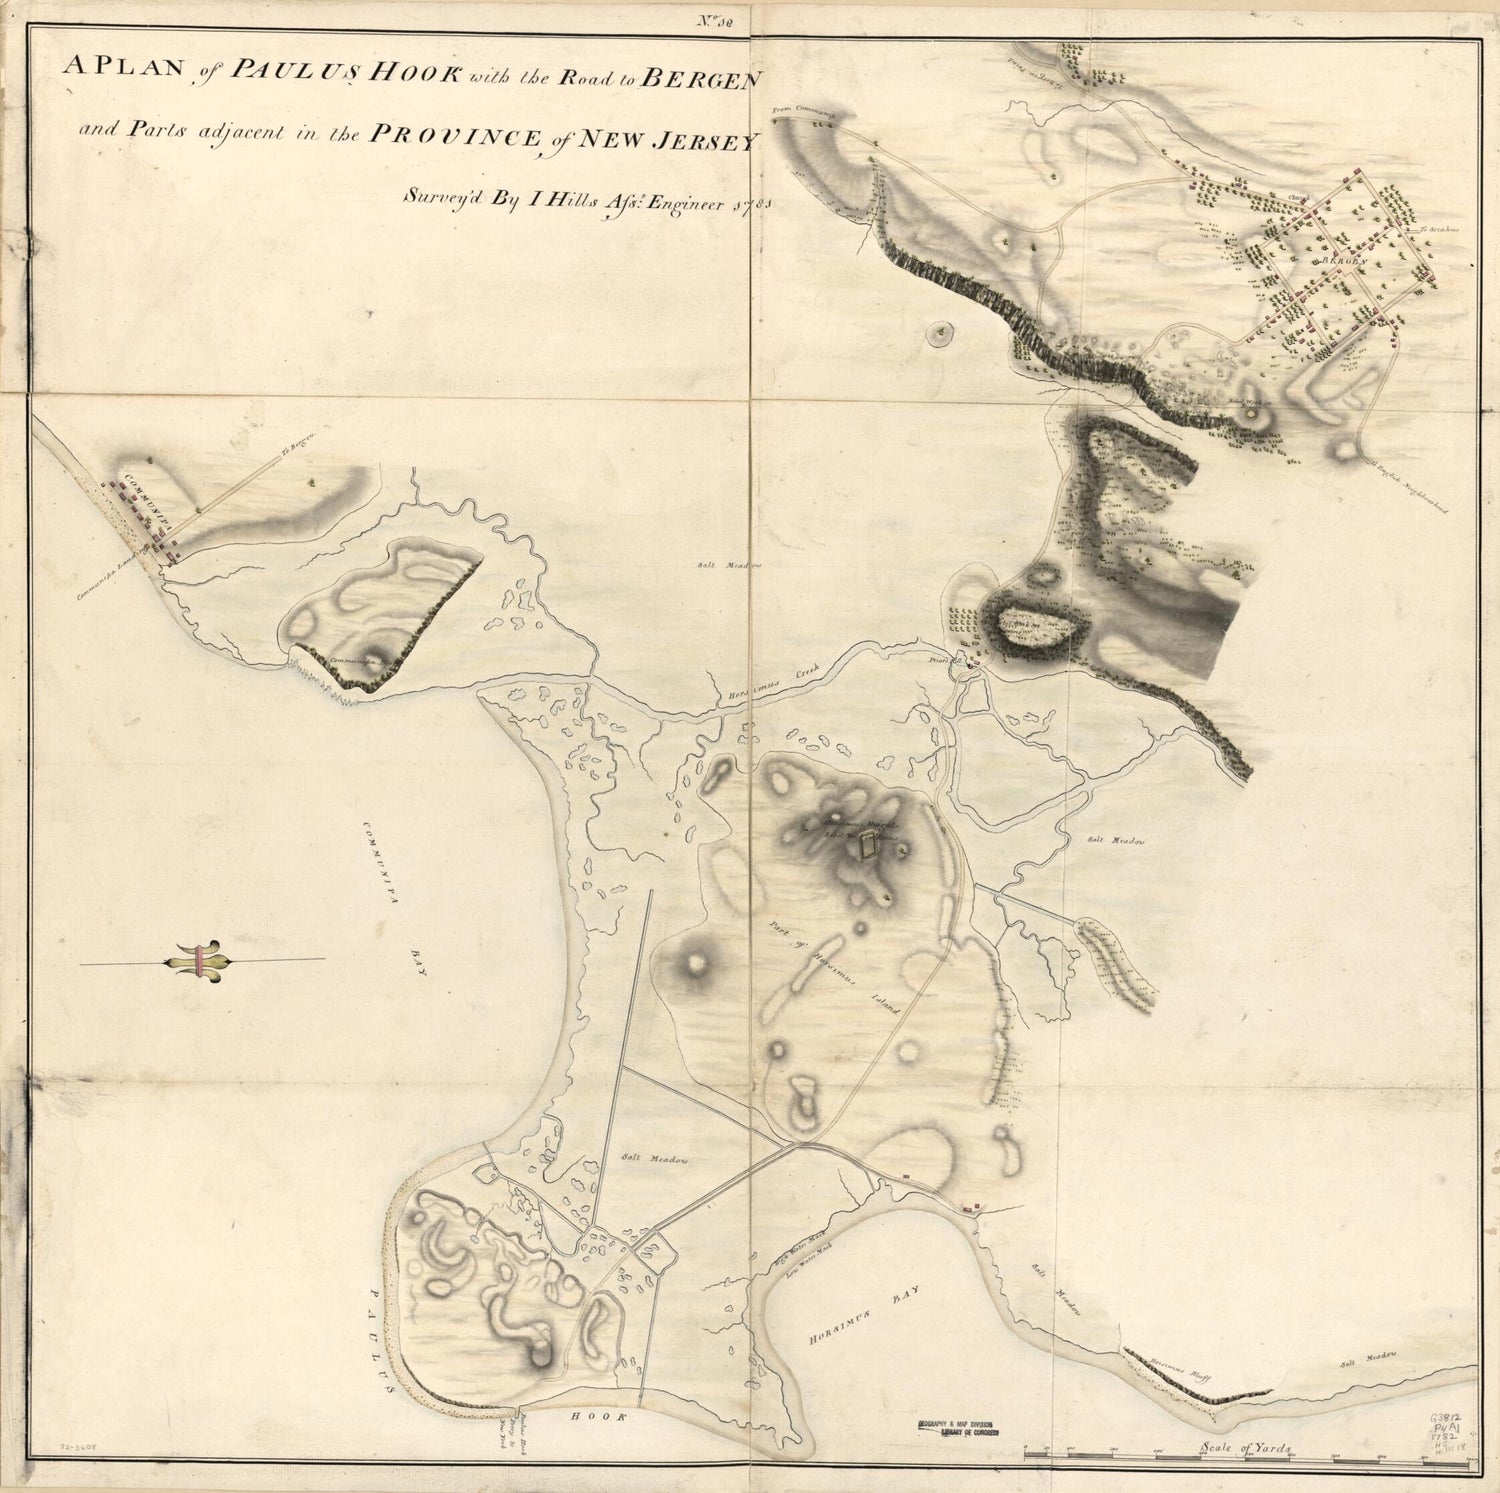 This old map of A Plan of Paulus Hook With the Road to Bergen and Parts Adjacent In the Province of New Jersey from 1781 was created by John Hills, Benjamin Morgan in 1781